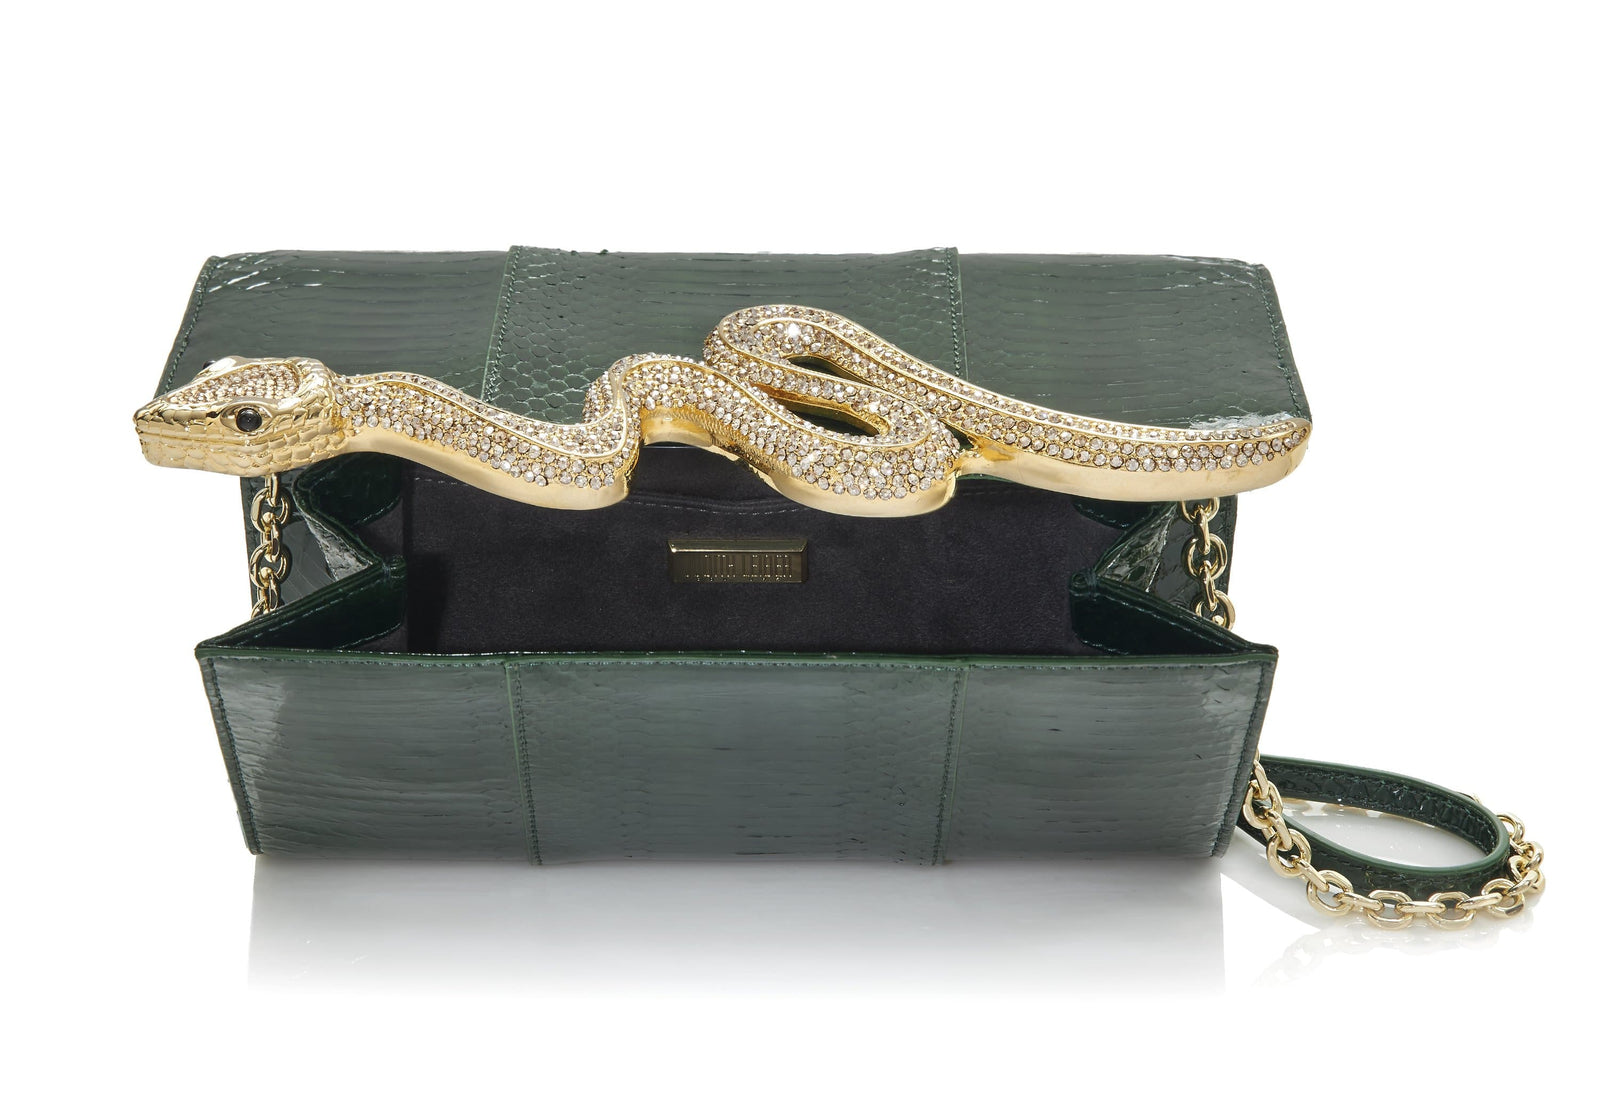 Frills and Thrills: The Magic of a Judith Leiber Clutch Bag